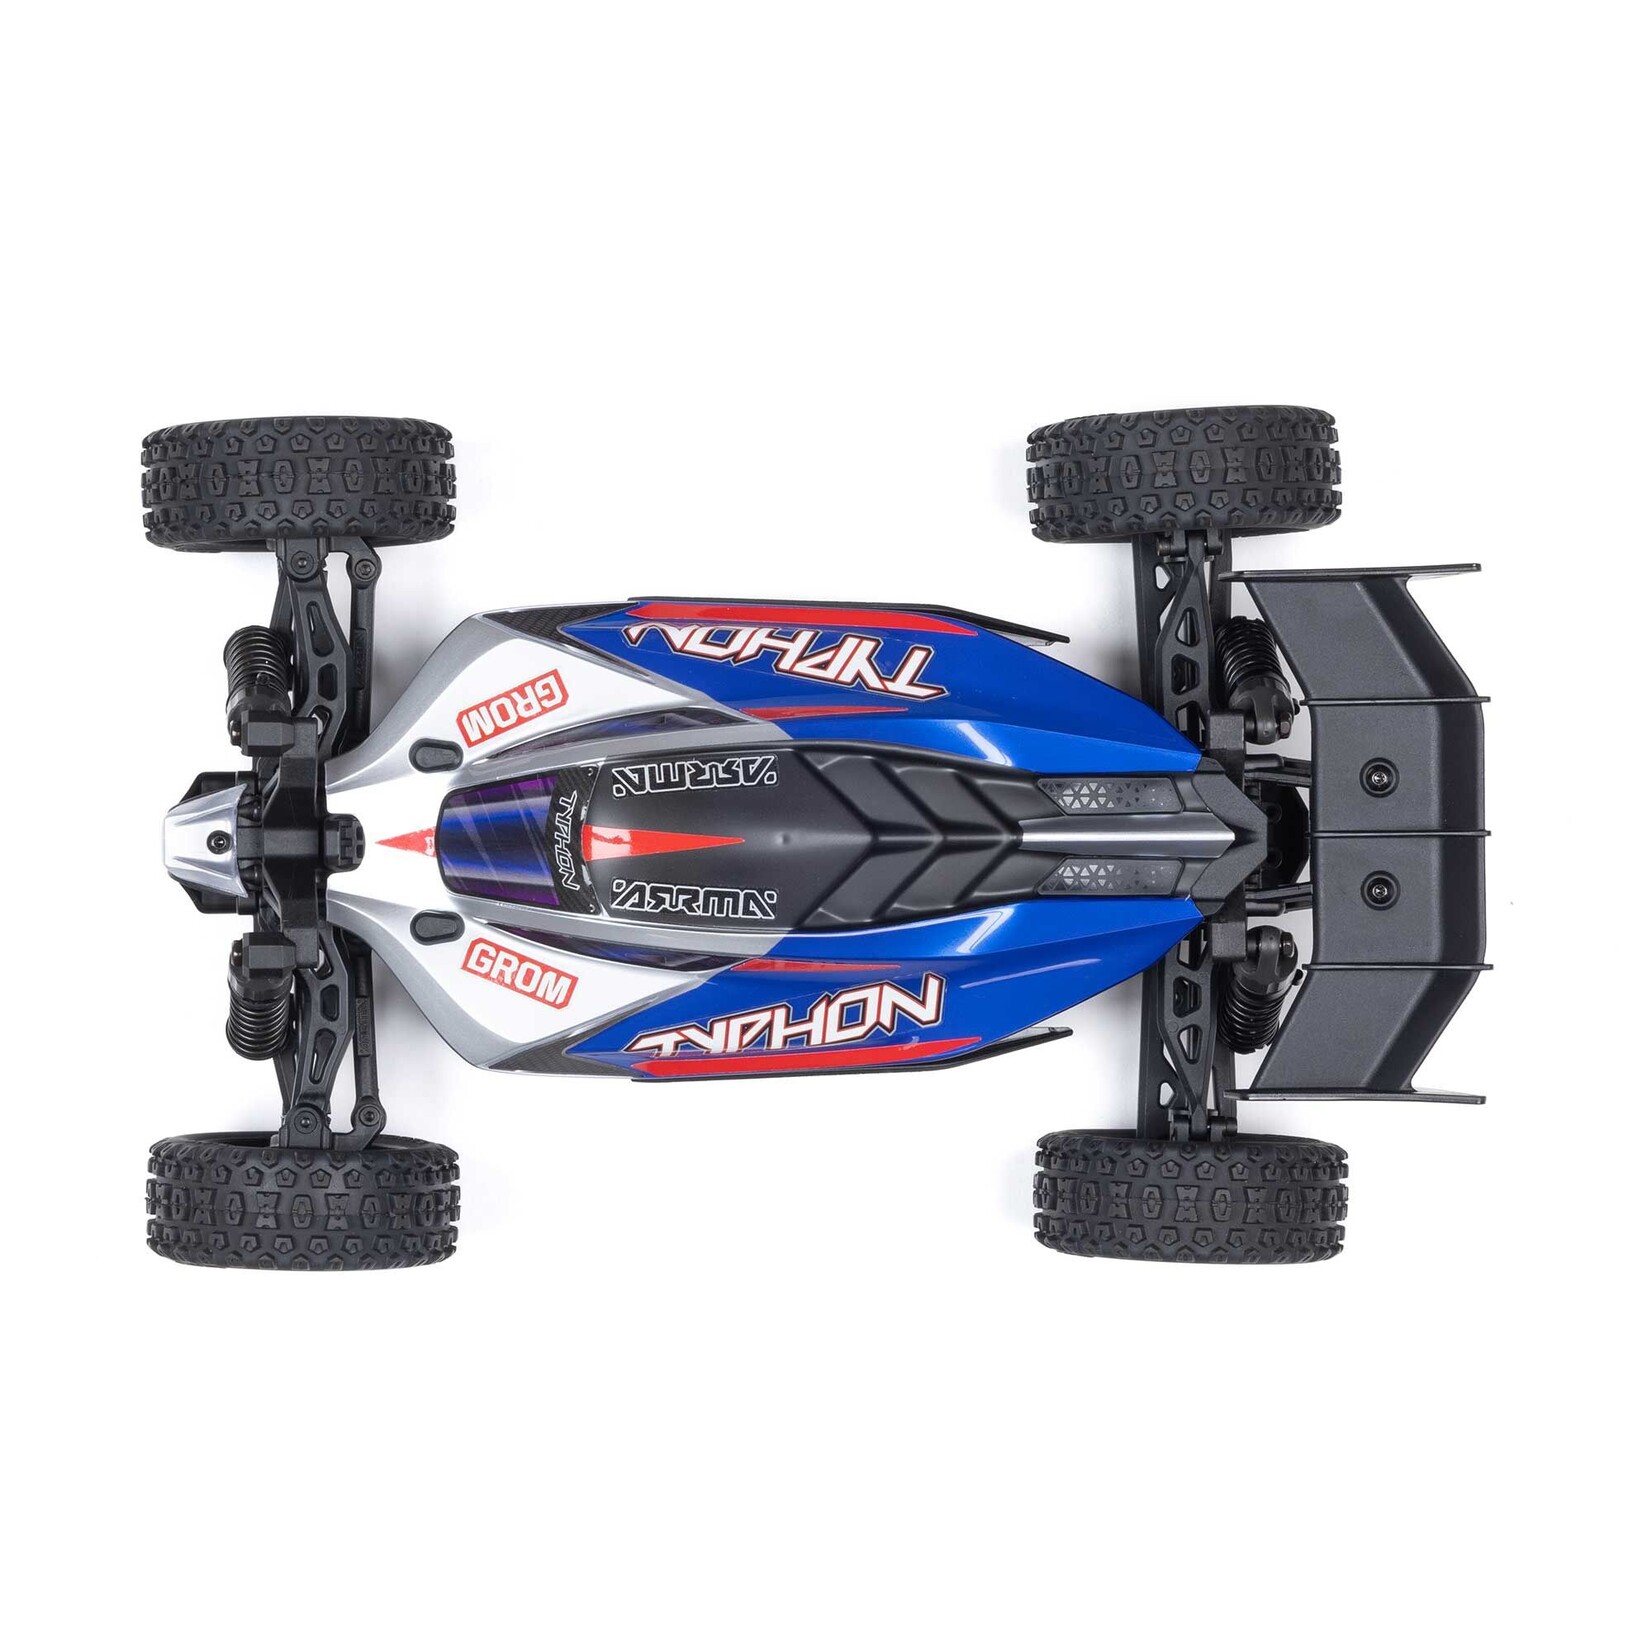 Arrma Typhon Grom 4X4 Smart Scale Buggy - Blue/Silver